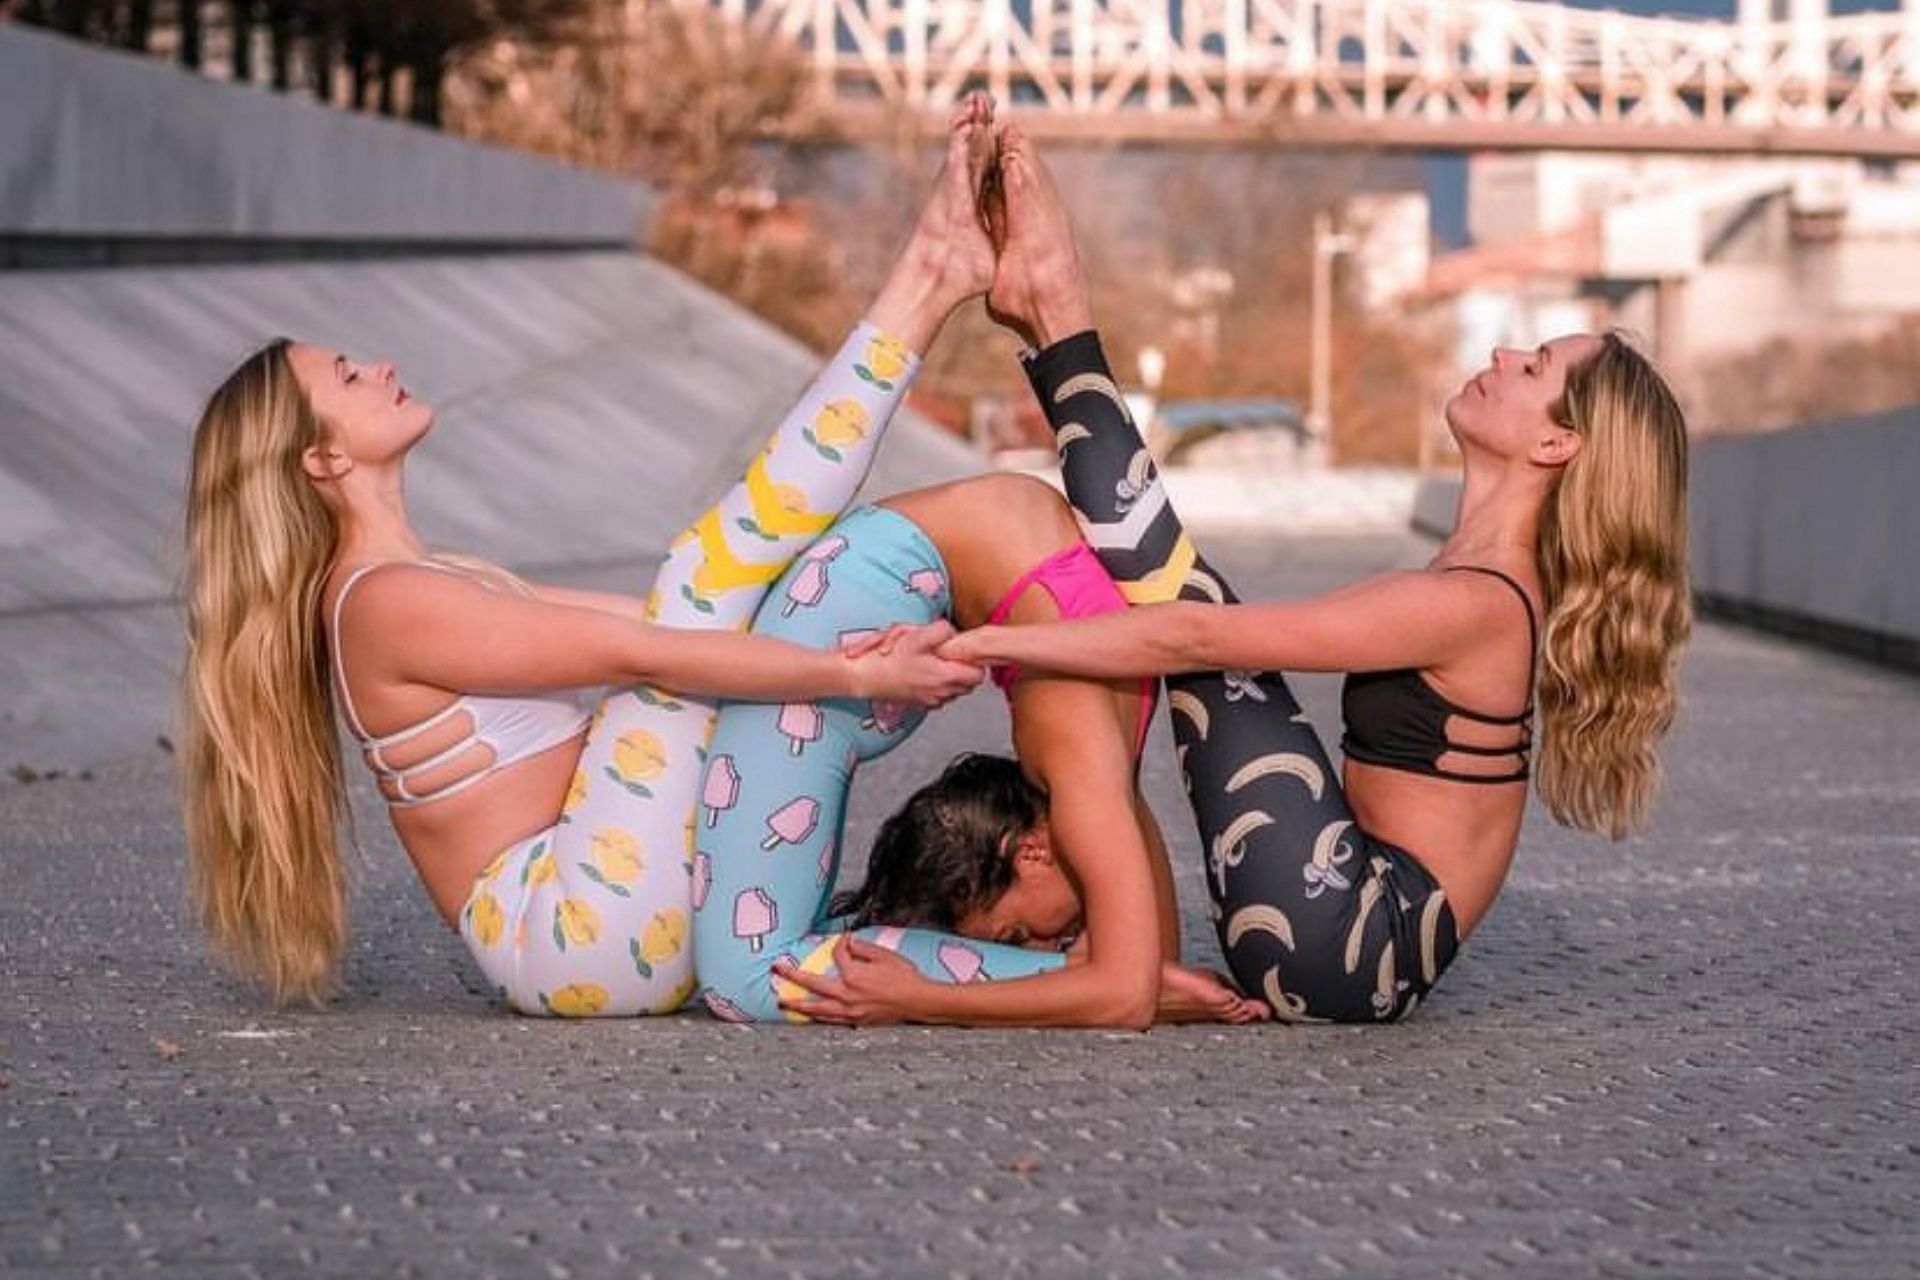 Doing 3-person yoga requires strength and coordination. (Photo via Instagram/reneechoiphotography)